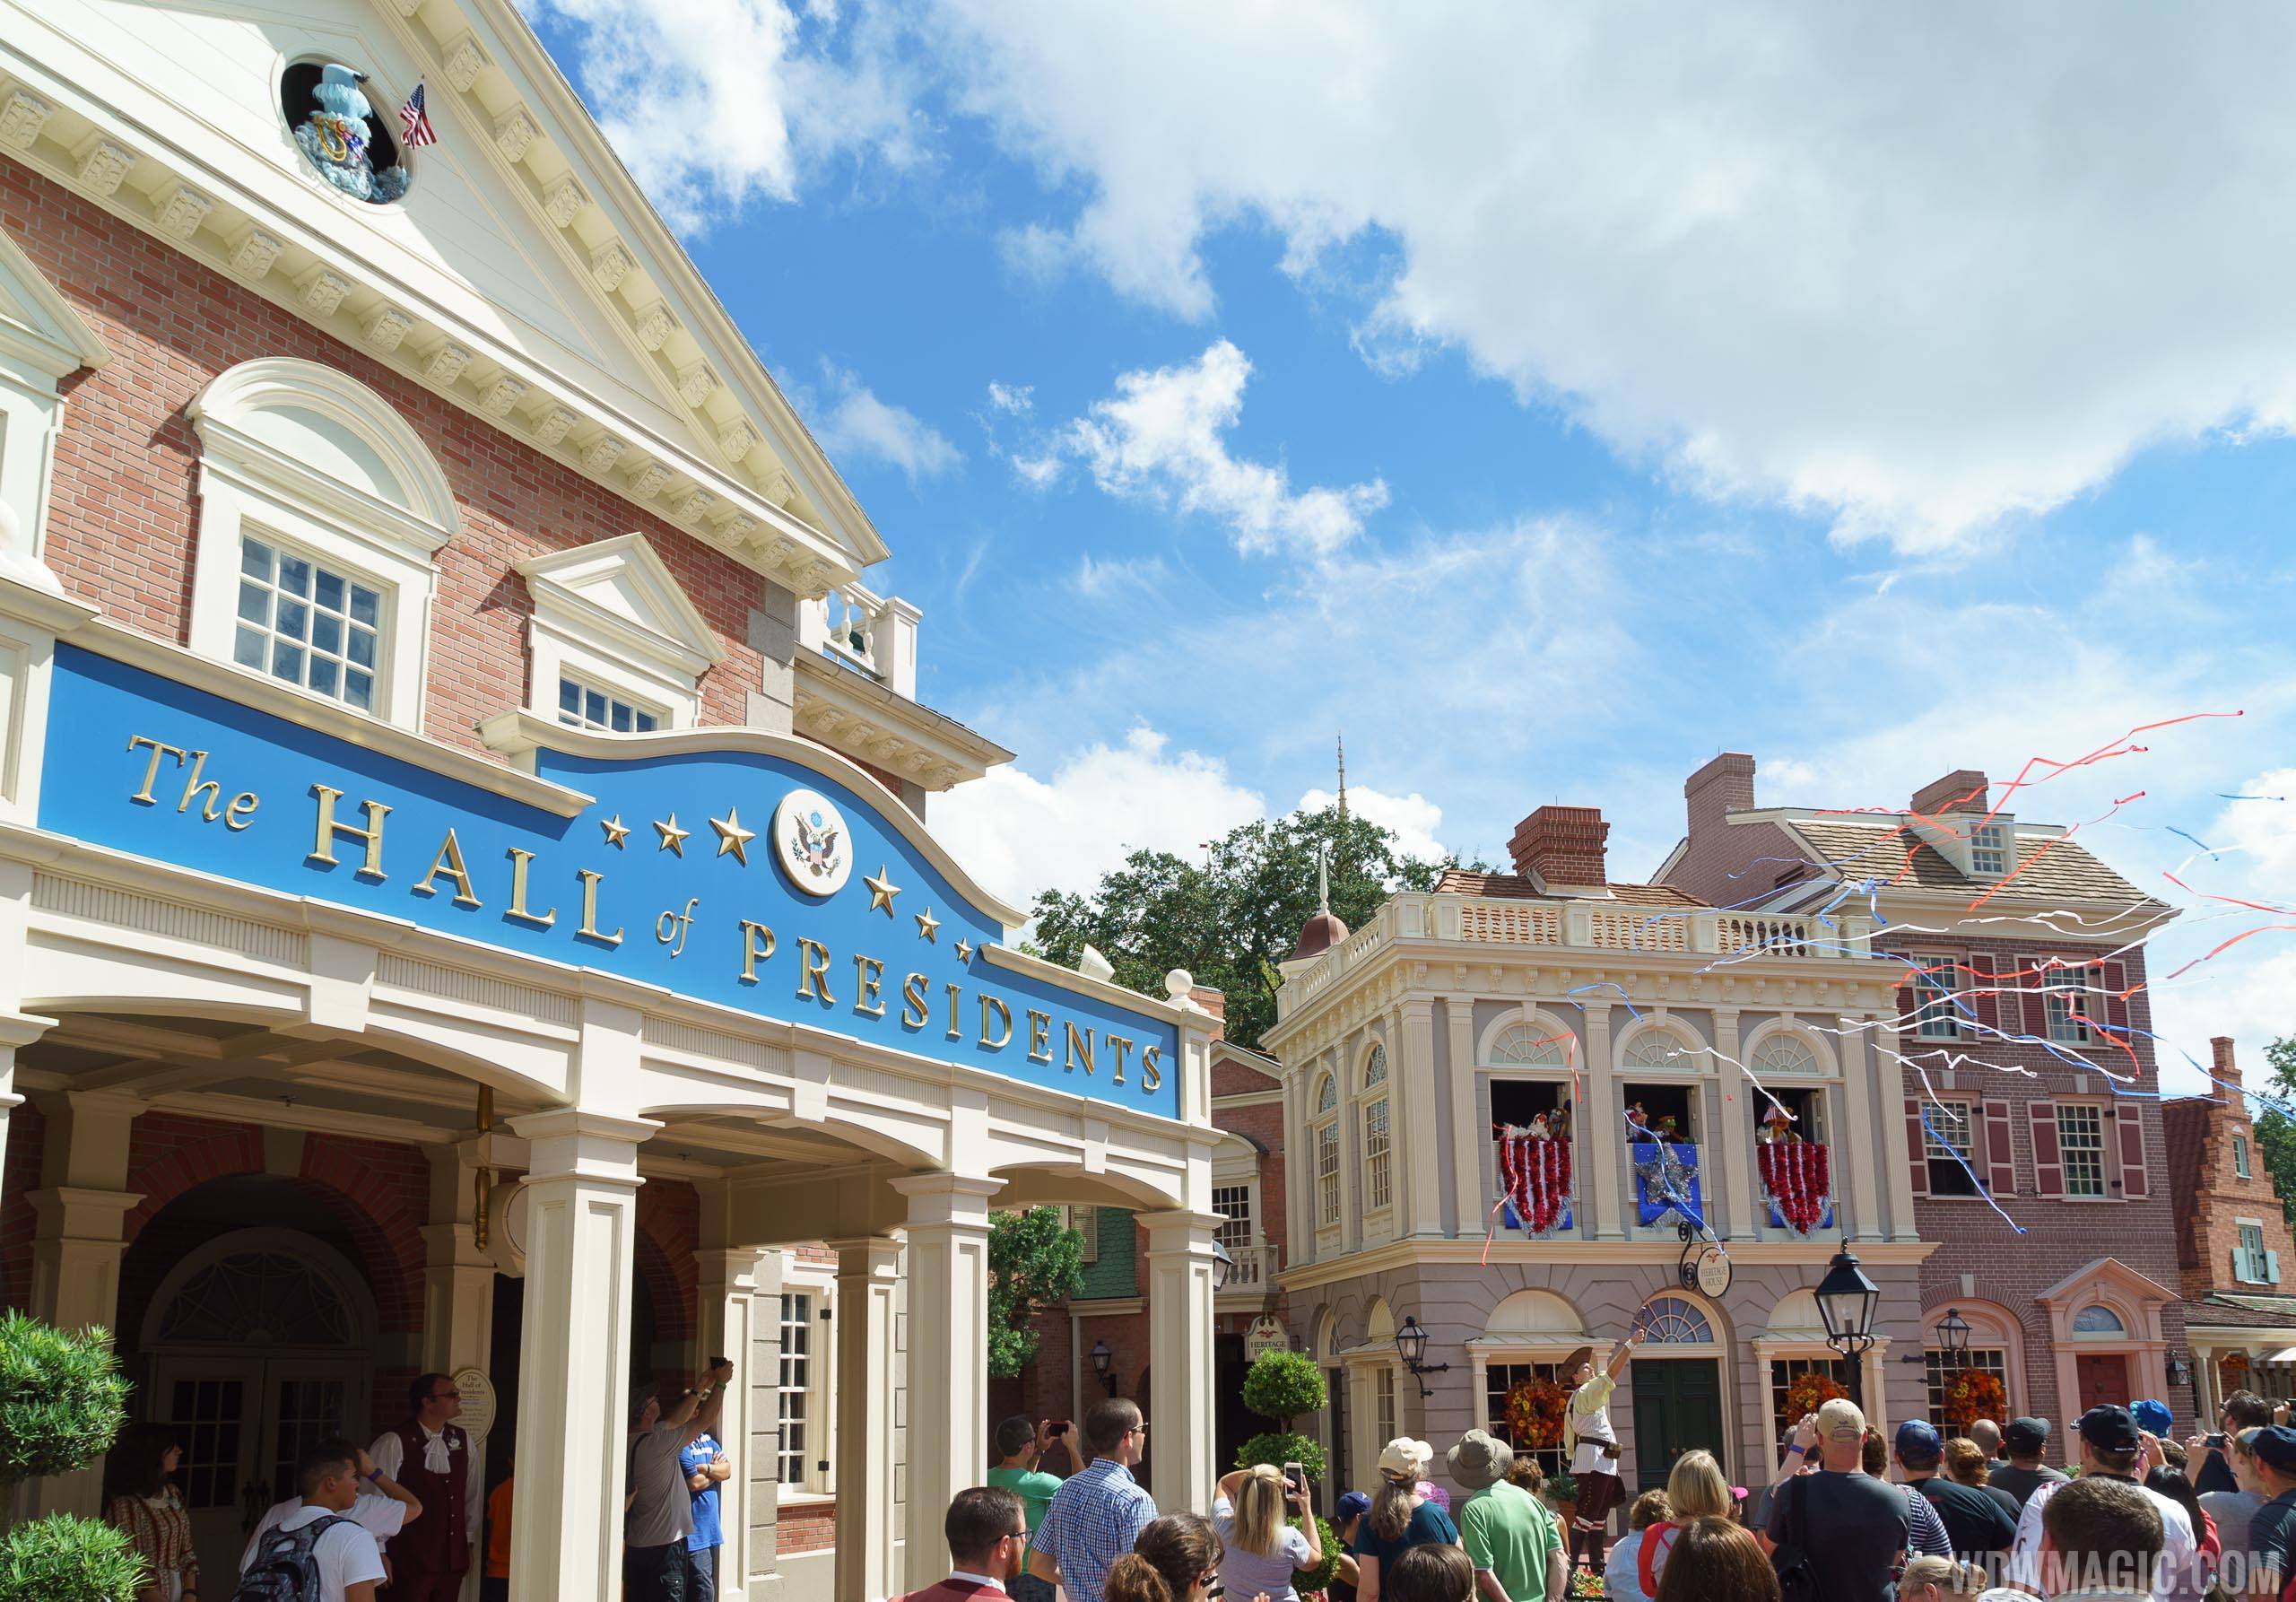 Hall of Presidents reduced operating hours this week for improvements